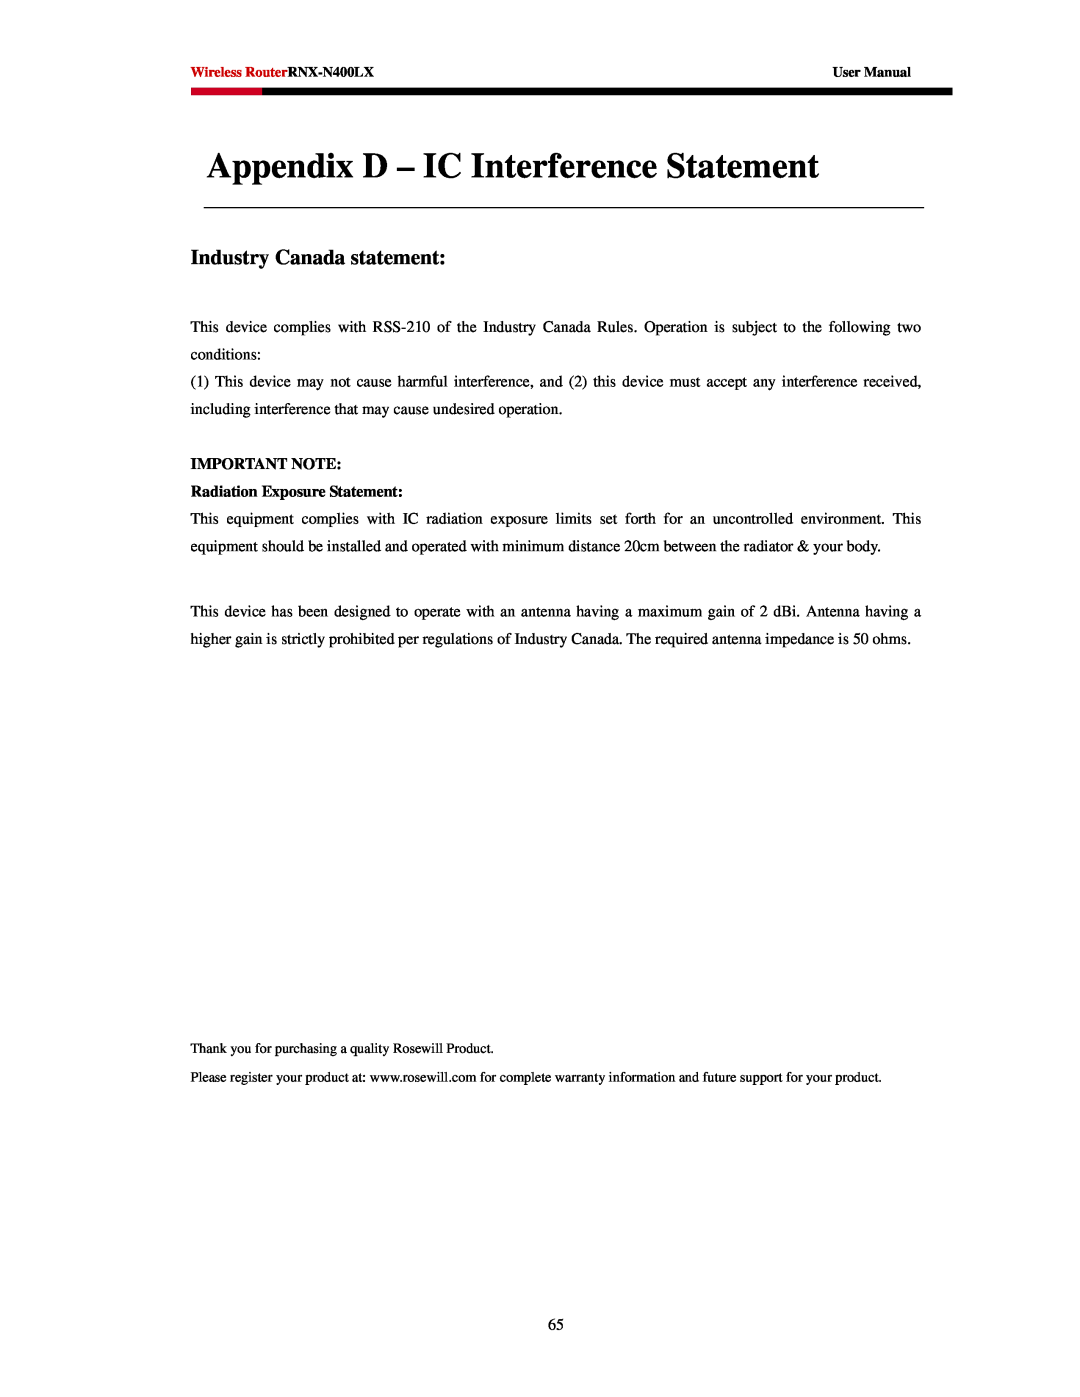 Rosewill RNX-N400LX user manual Appendix D - IC Interference Statement, Industry Canada statement 